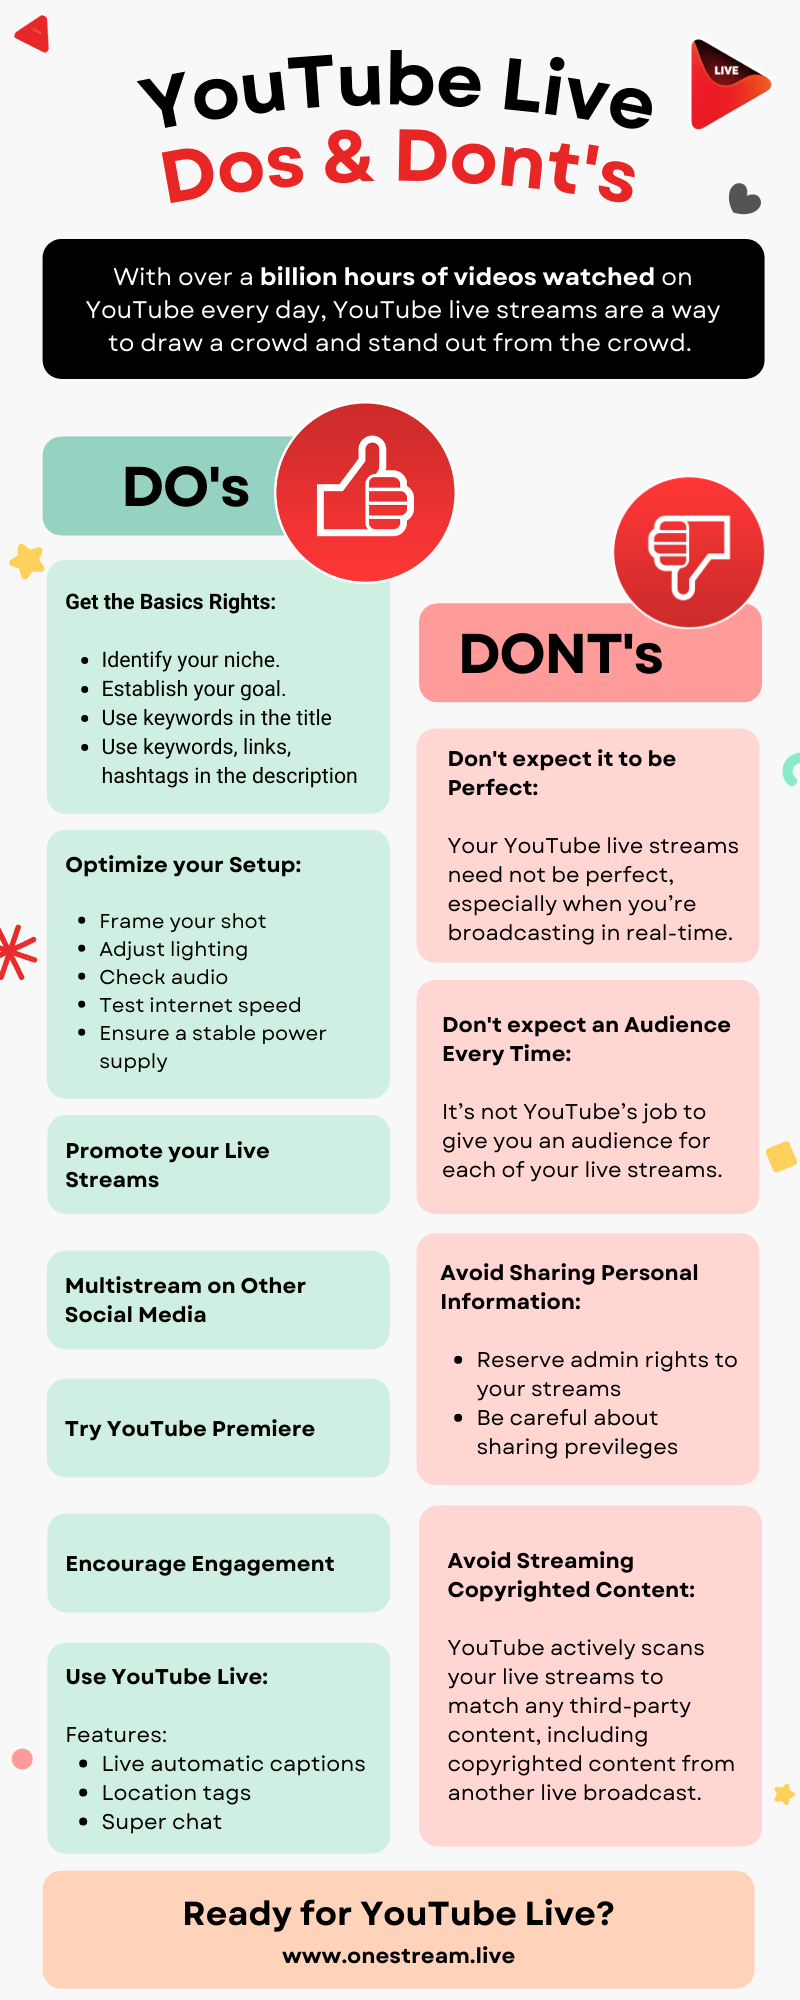 Do's & Don'ts of YouTube Live Streaming